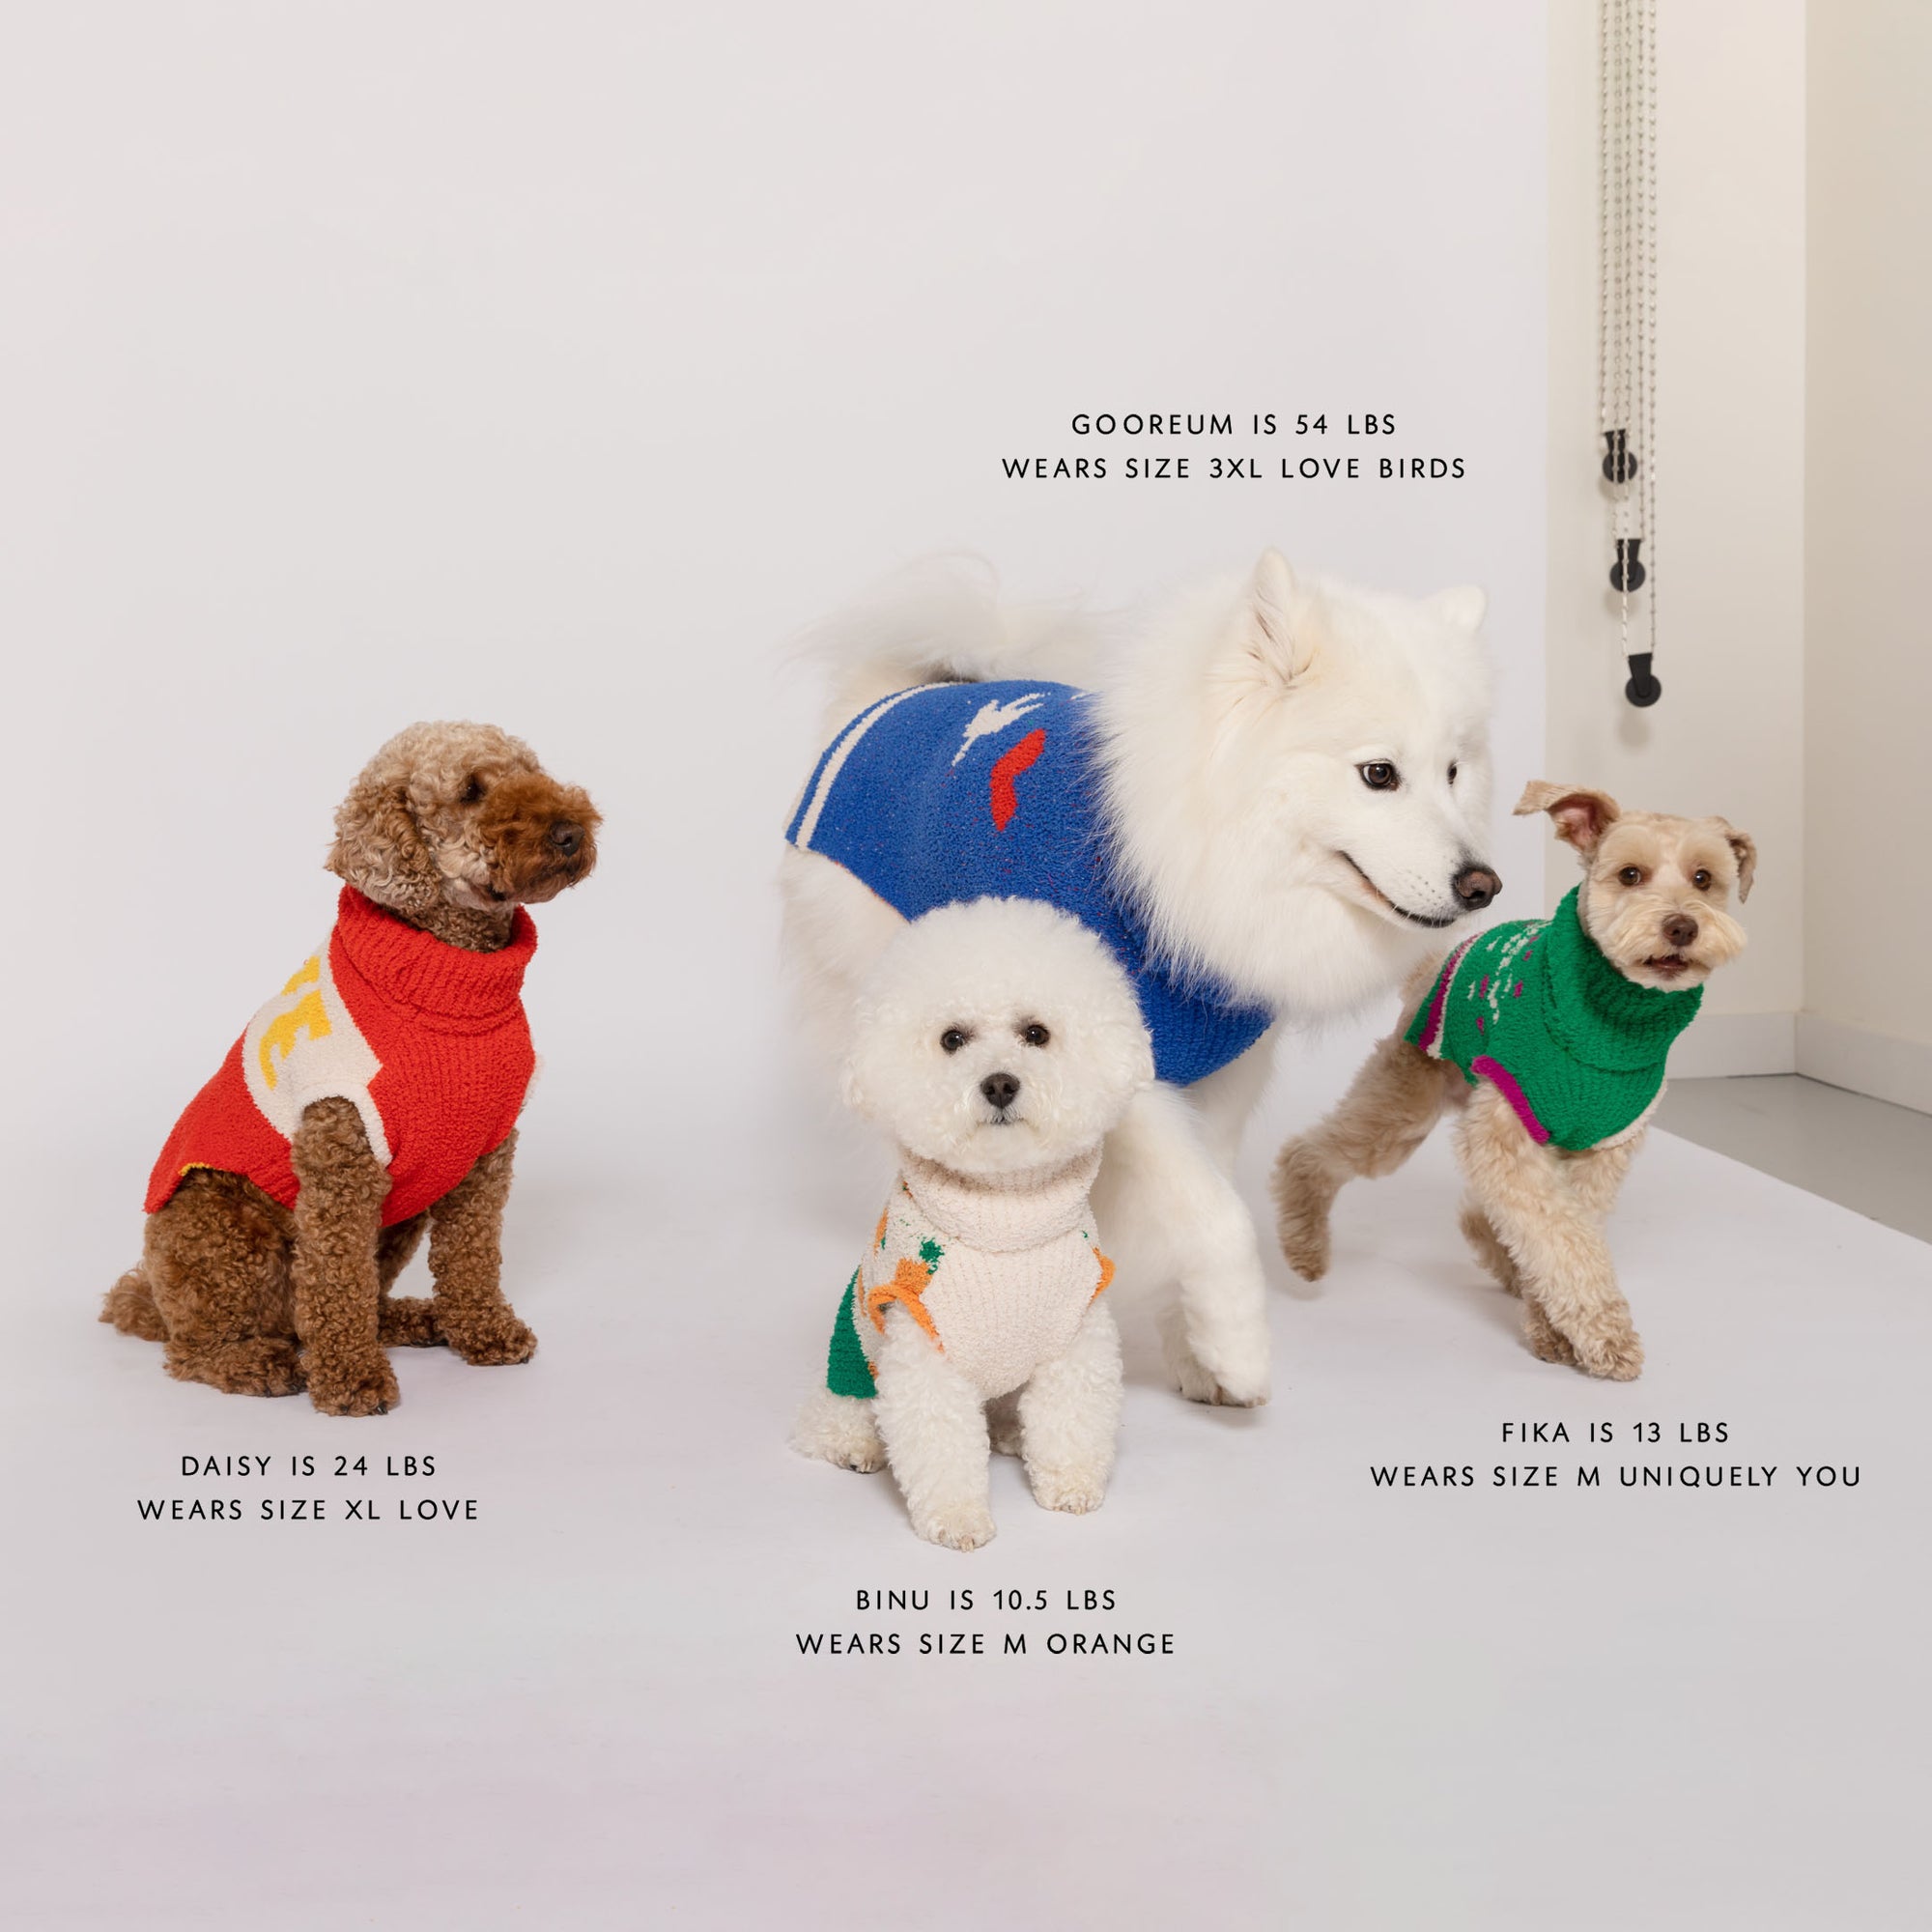 A group of four dogs of varying breeds and sizes, each wearing different sweaters from "The Furryfolks" collection. From left to right: Daisy, 24lbs,  a small dog wearing a red 'Love' sweater, size XL; Binu, 10.5, a white fluffy dog in an orange sweater with carrot motifs, size M; GOOREUM, 54lbs, a large white dog in a blue 'Love Birds' sweater with heart and bird motifs, size 3XL; Fika, 13lbs, a small dog in a green 'Uniquely You' sweater, size M.